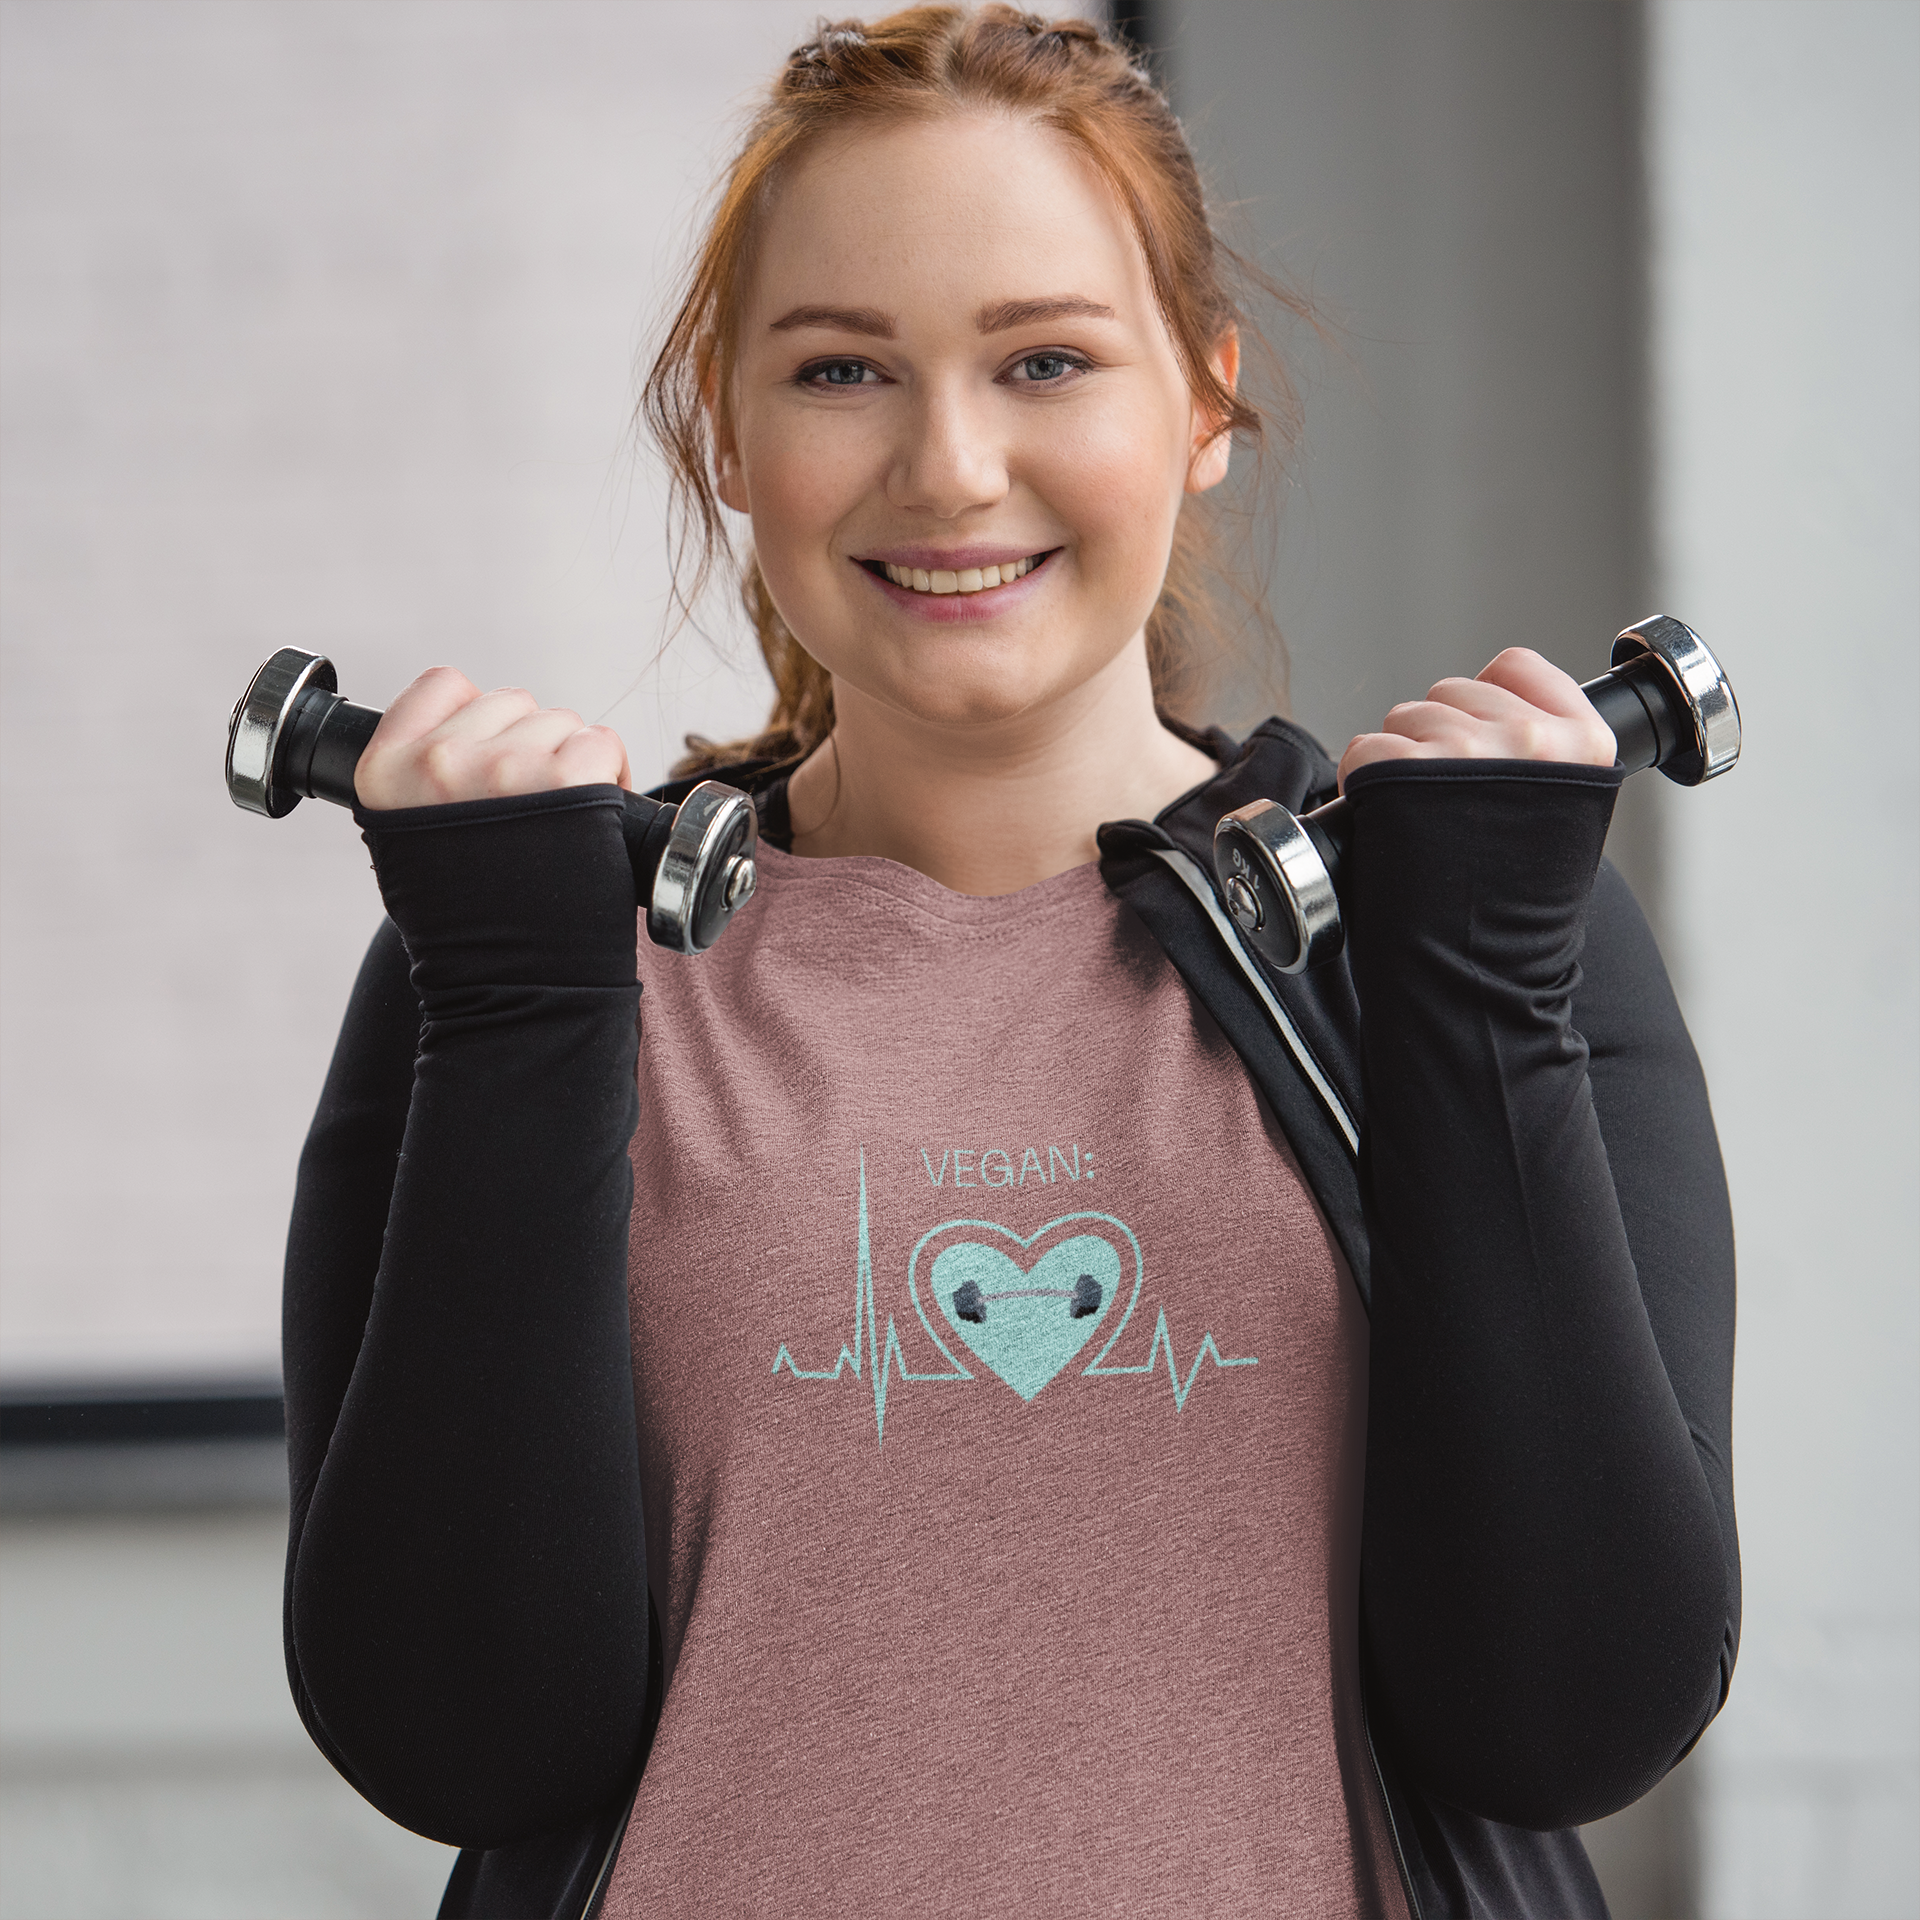 vegan heartbeat t-shirt with a dumbbell, in the color Heather Mauve worn by a woman at the gym